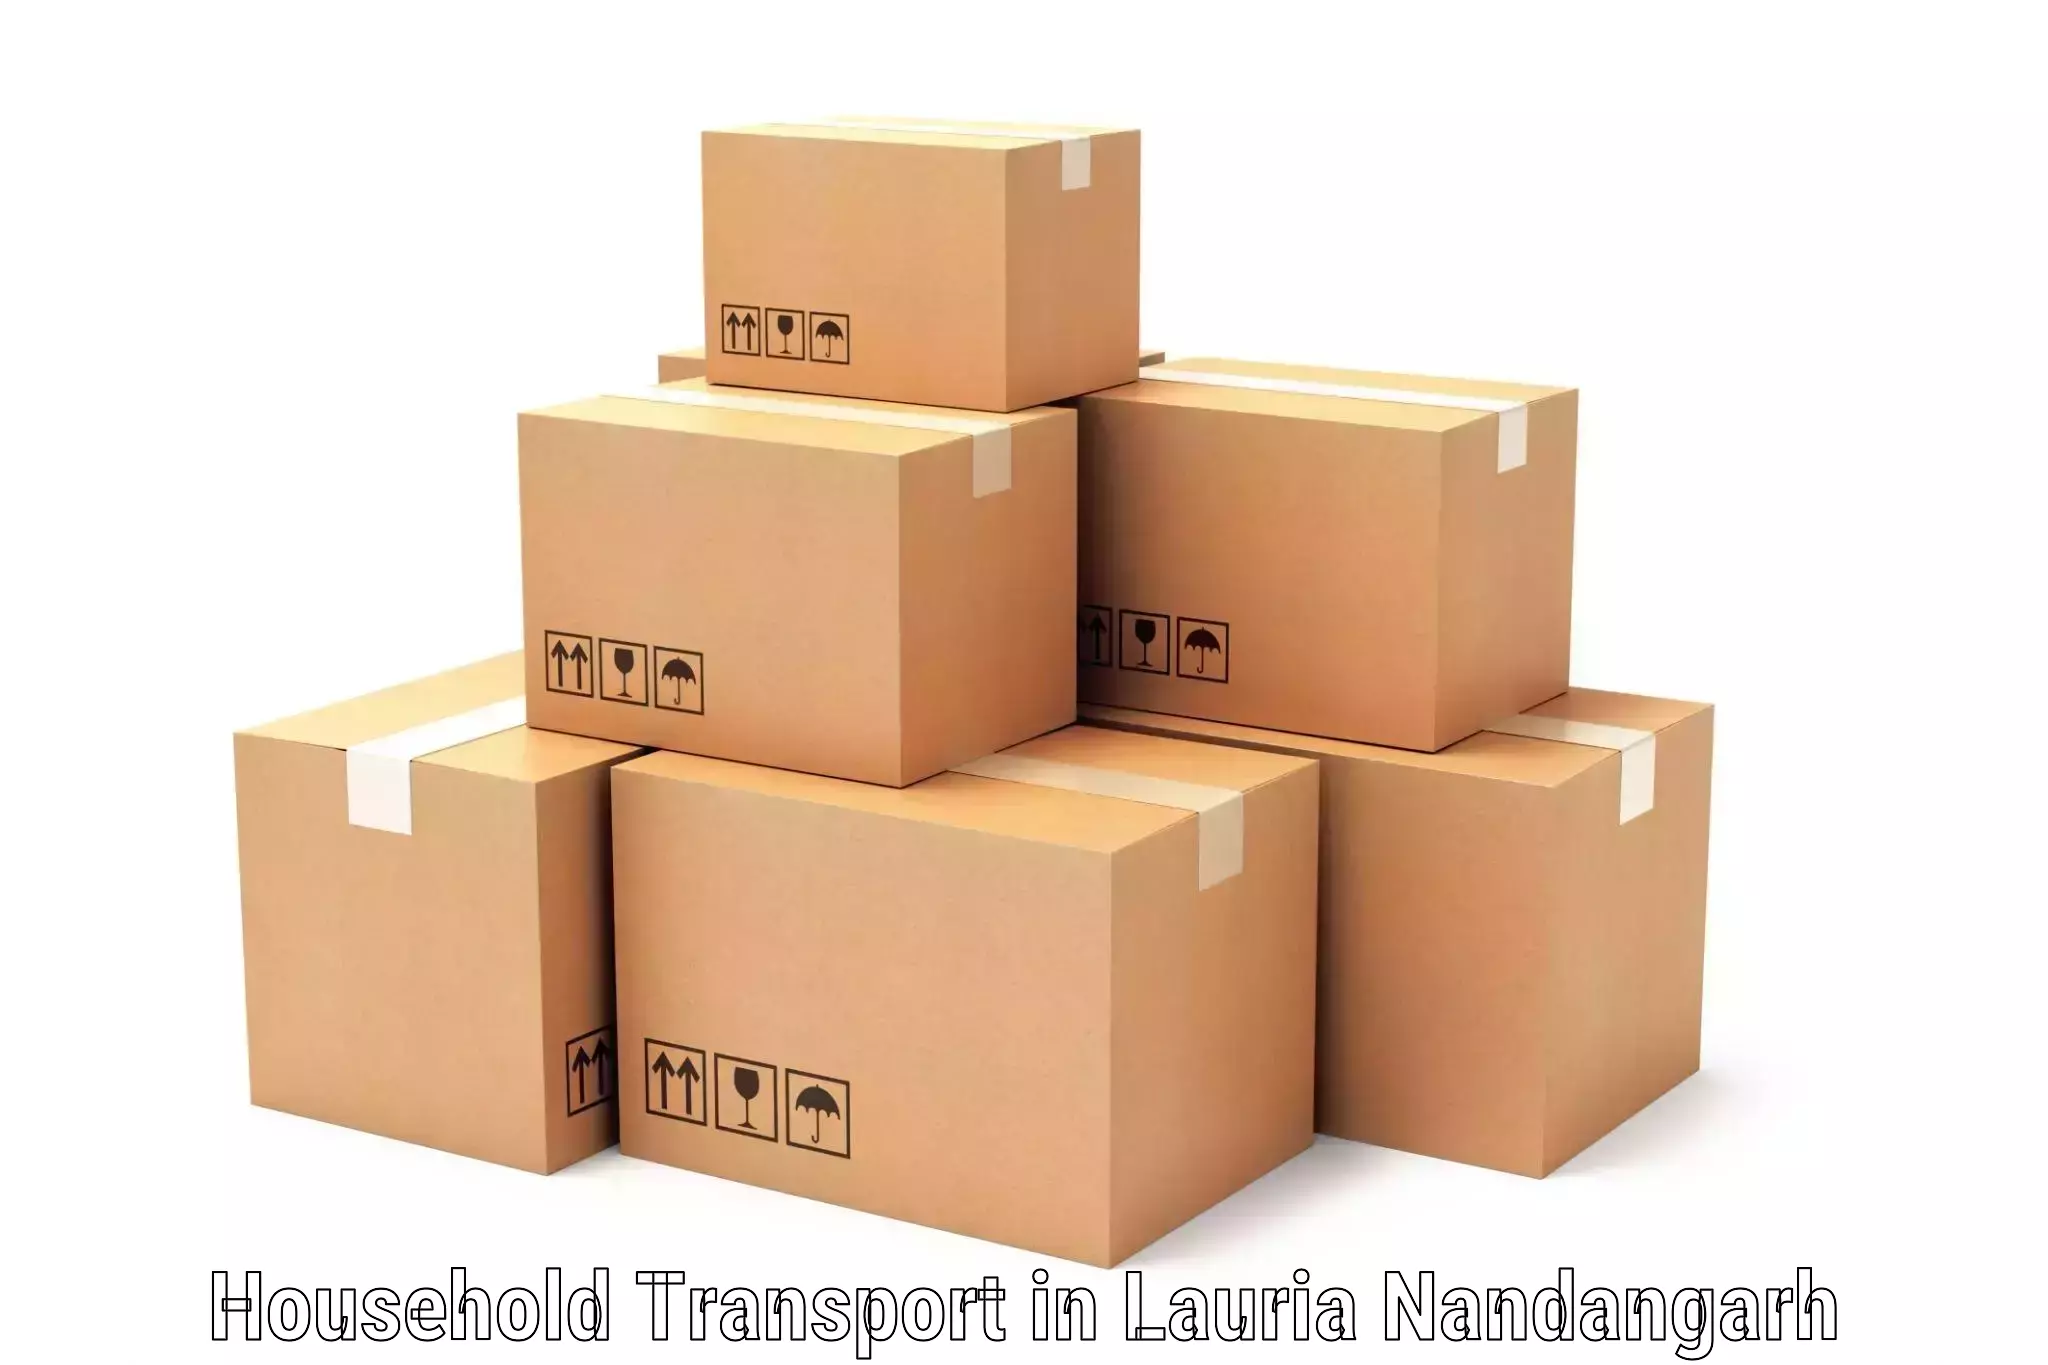 Professional moving assistance in Lauria Nandangarh